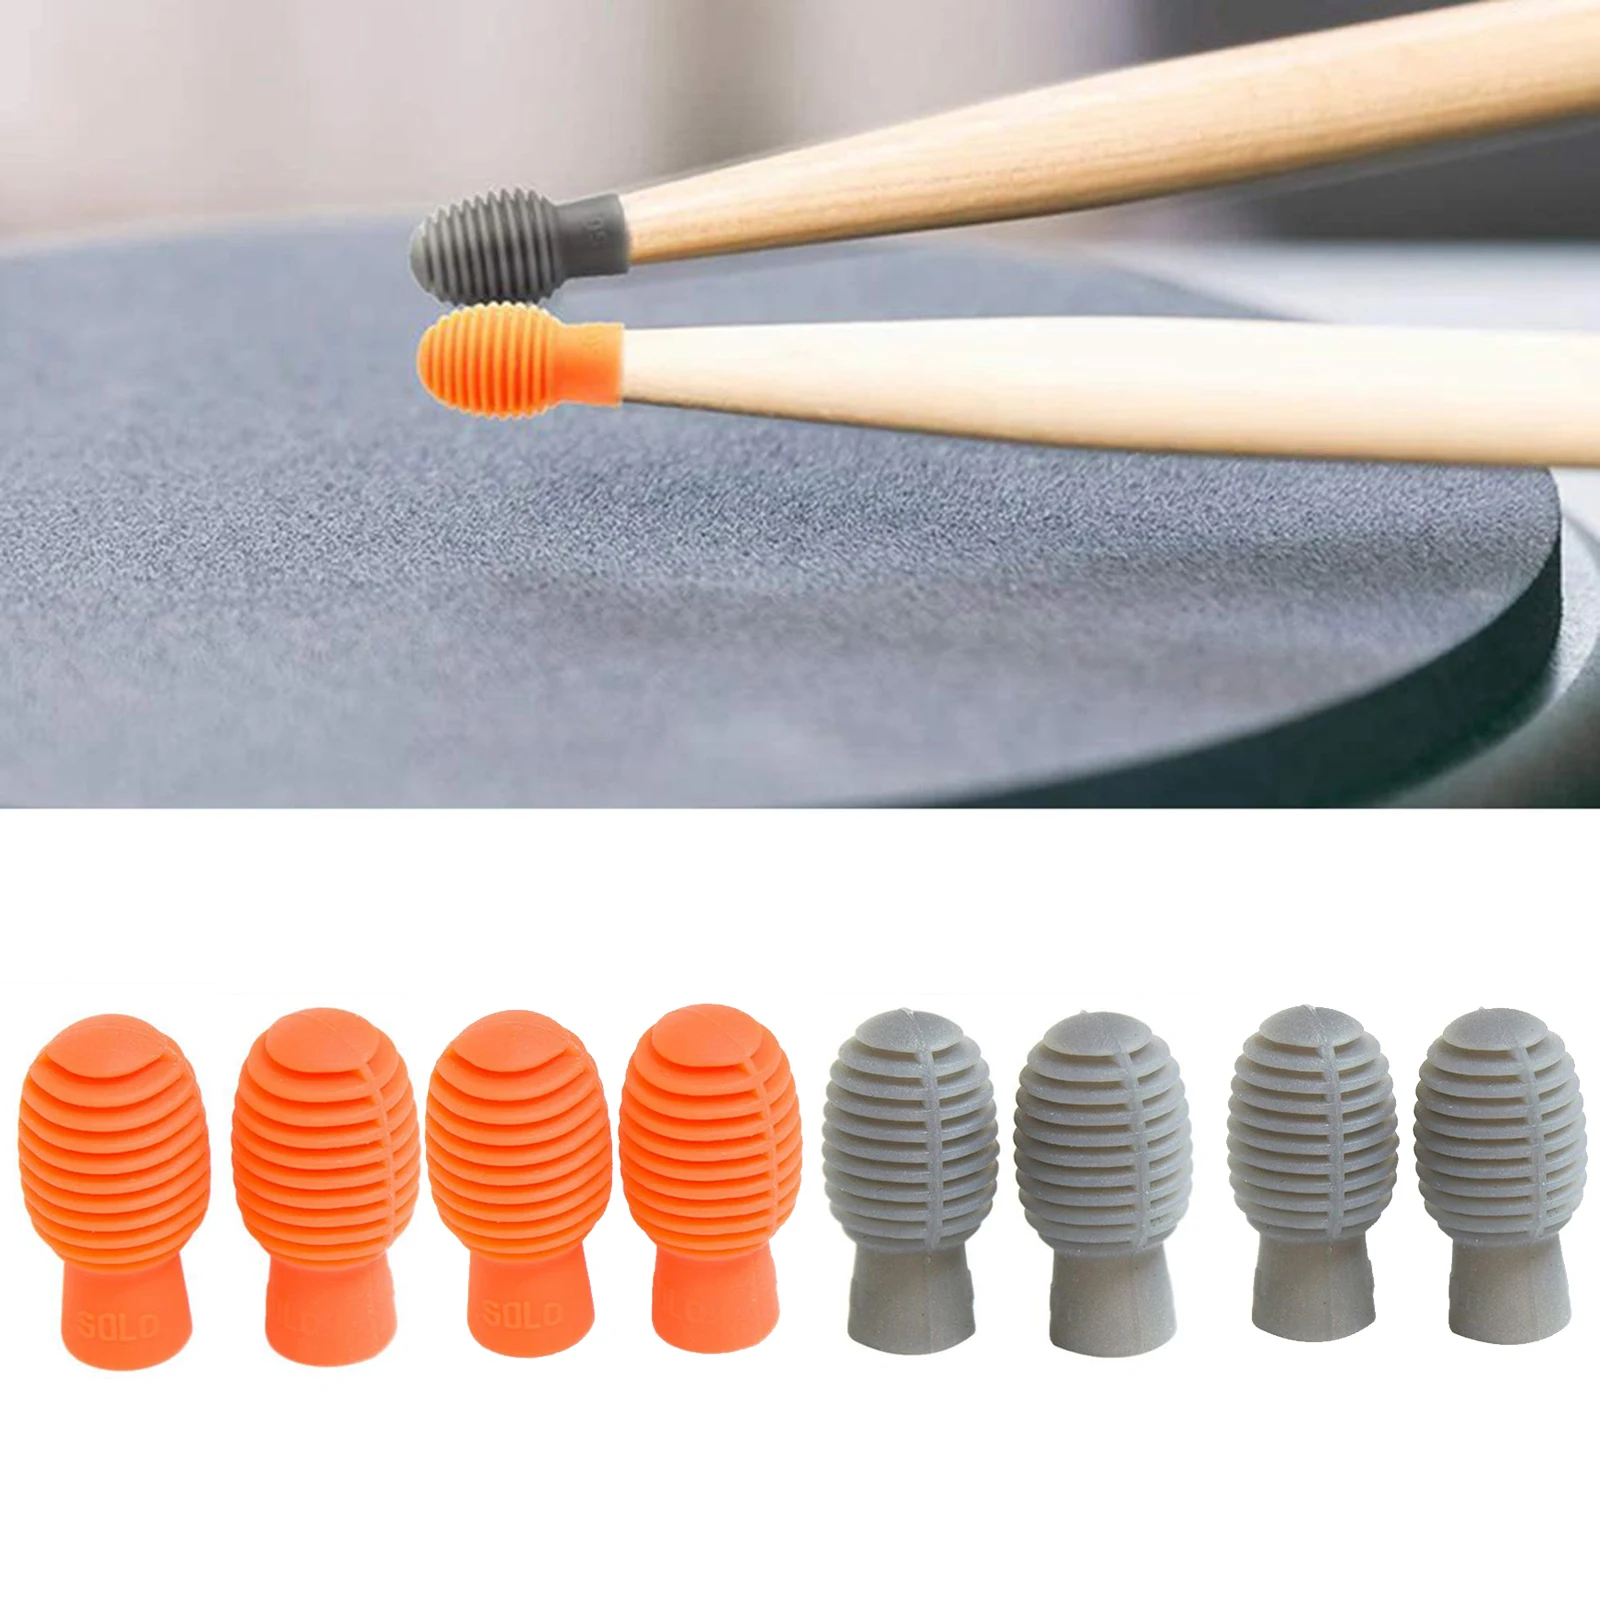 4Pieces Silicone Drum Rubber Sleeve for Sticks, Silent Damper, Musical Instruments Percussion Accessory